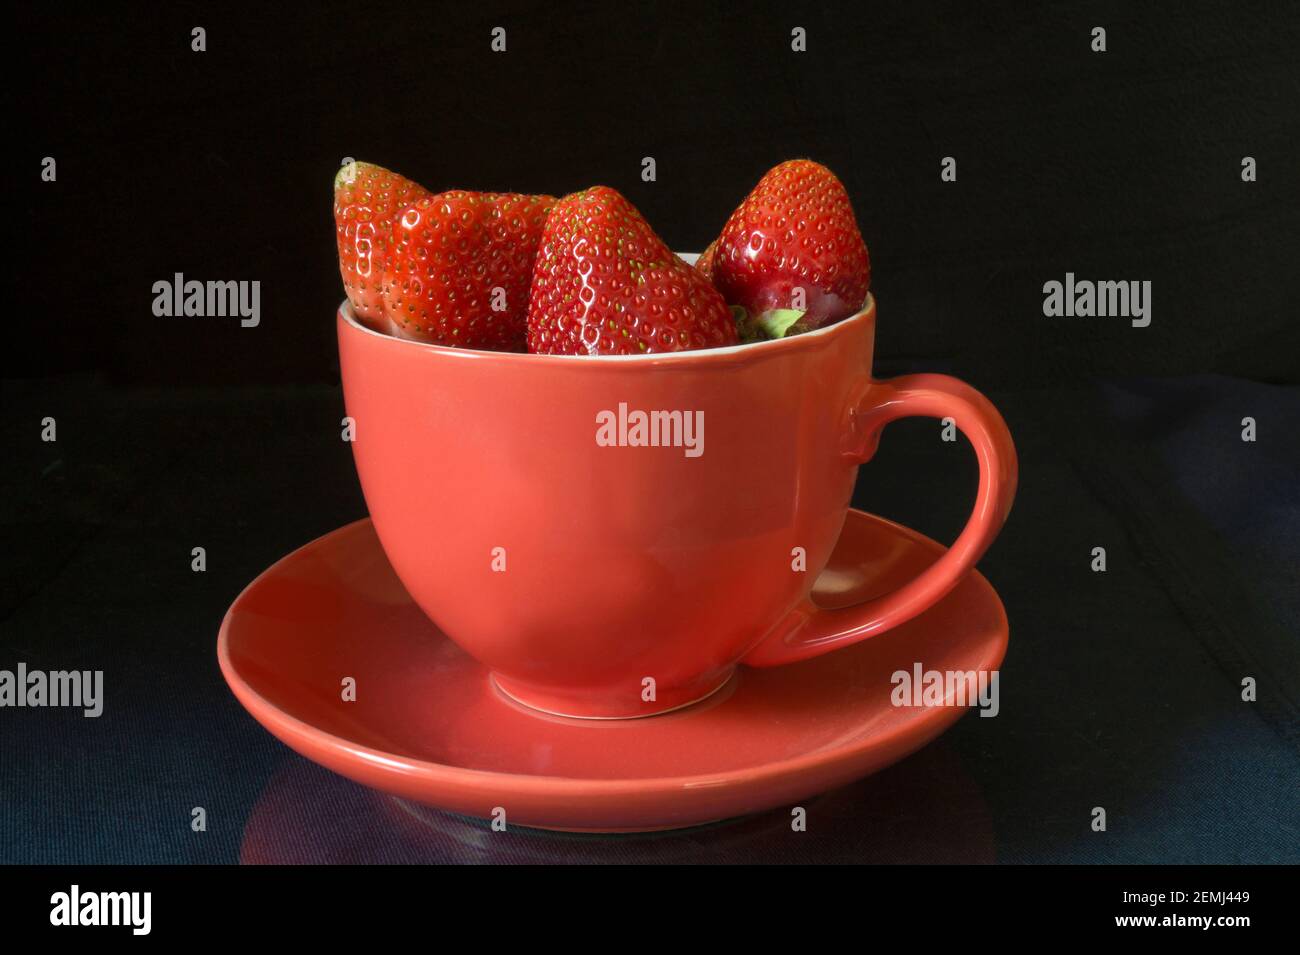 The Strawberries in cup on black background and table with reflection. Red ripe berries by summer Stock Photo